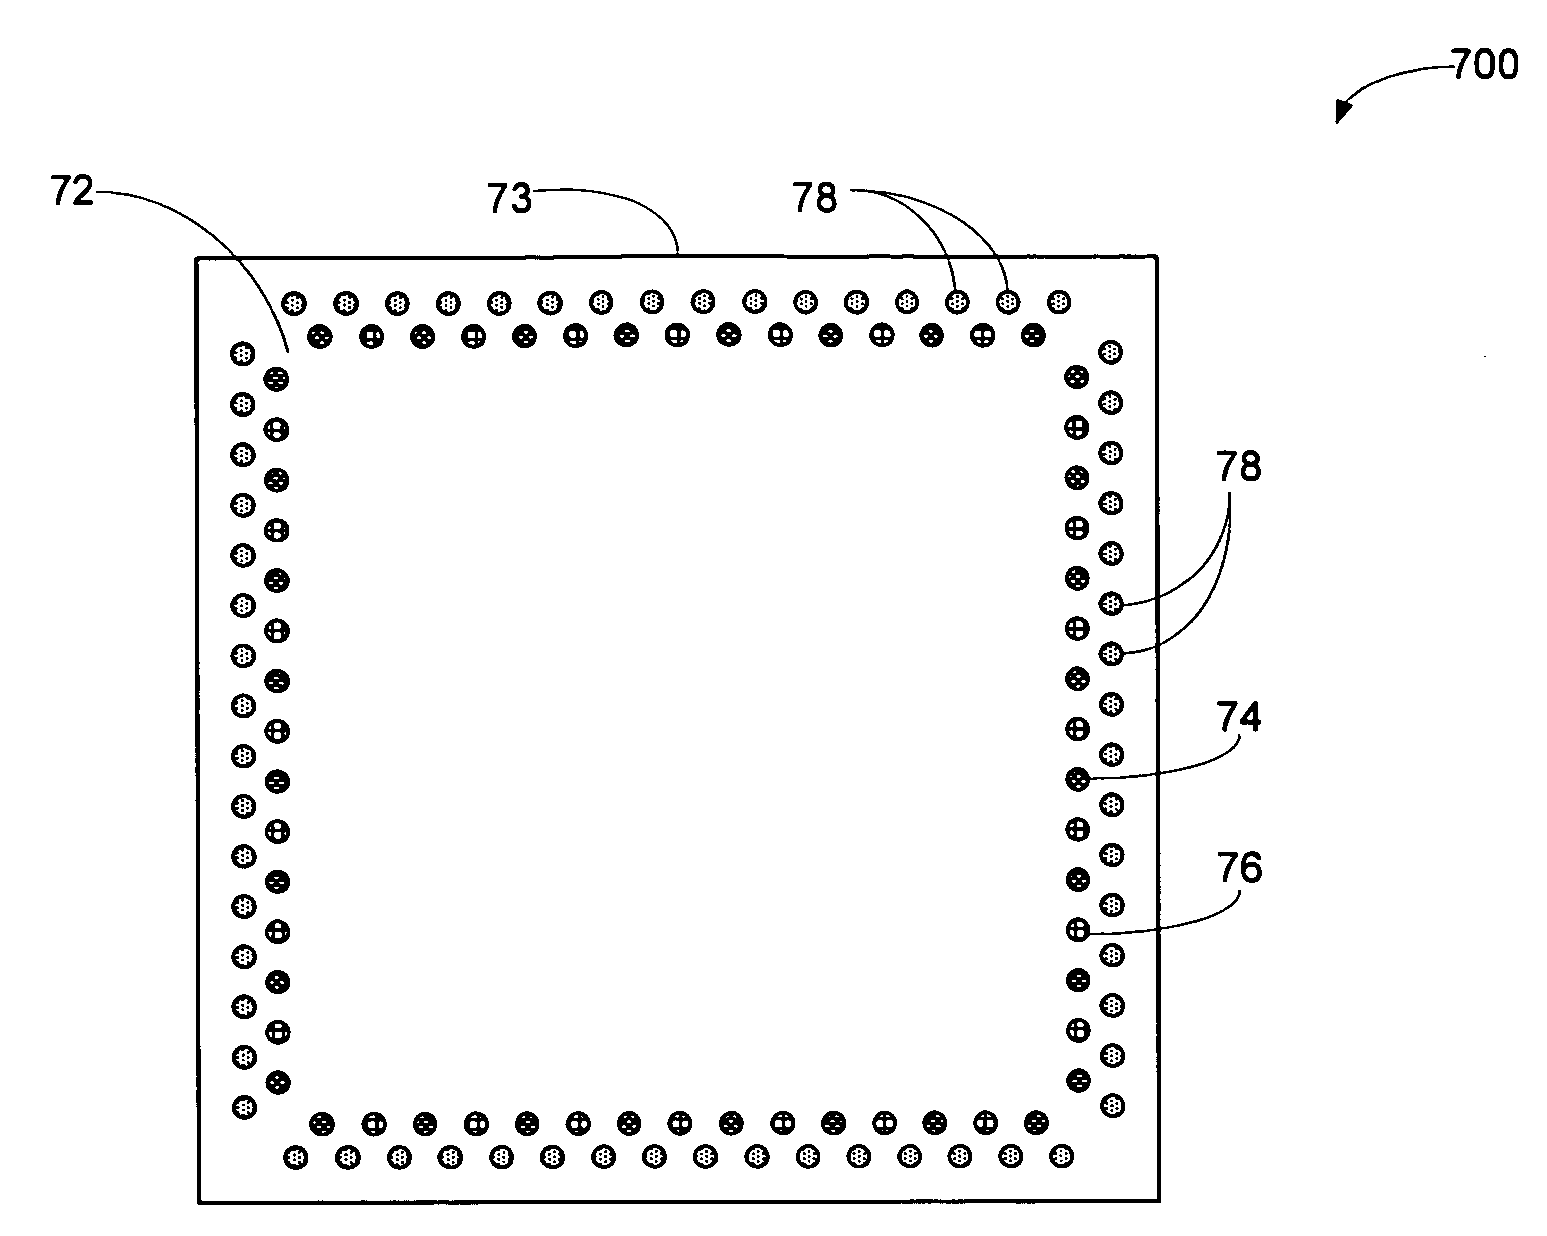 Flip chip interconnection pad layout